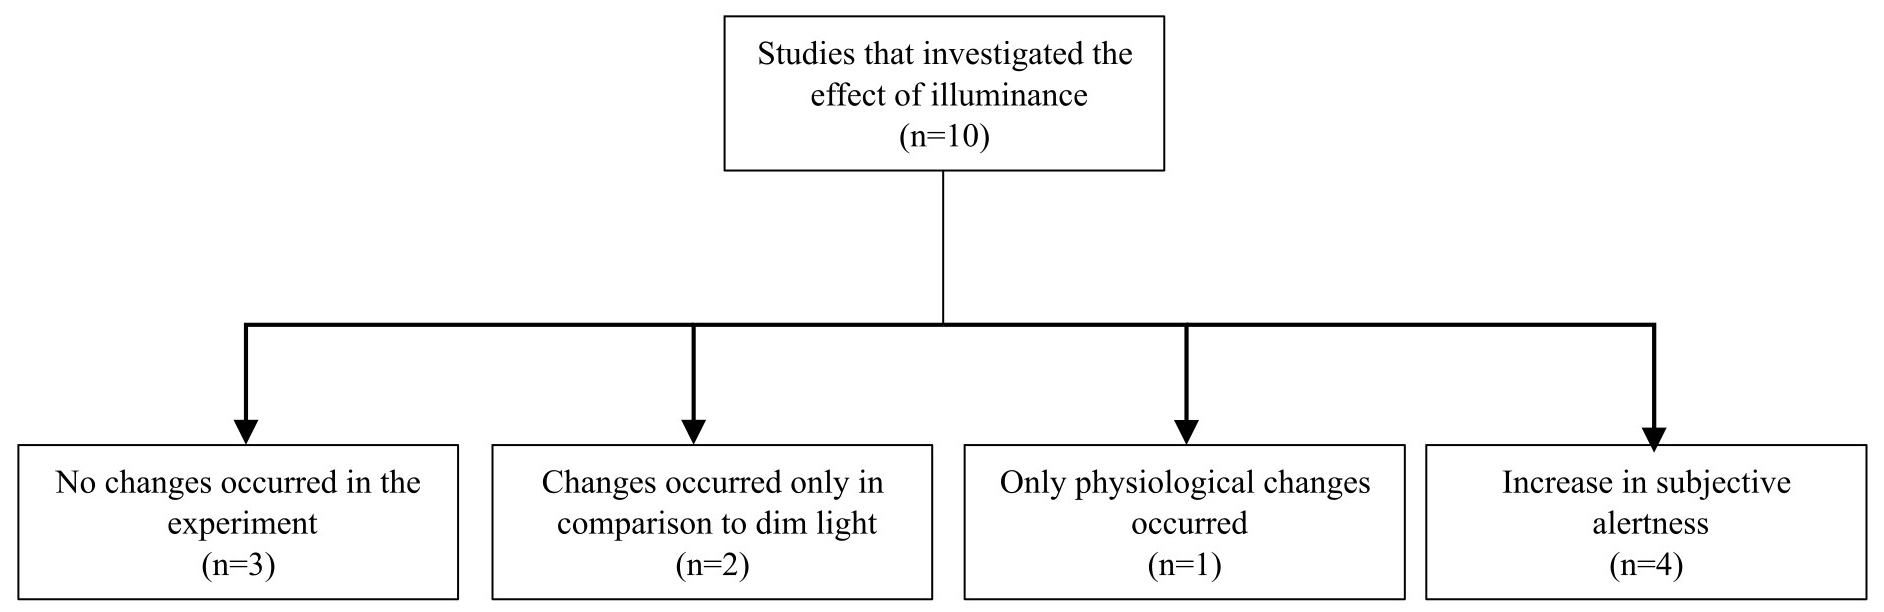 Studies that investigated the effect of illuminance on alertness and the main conclusions.